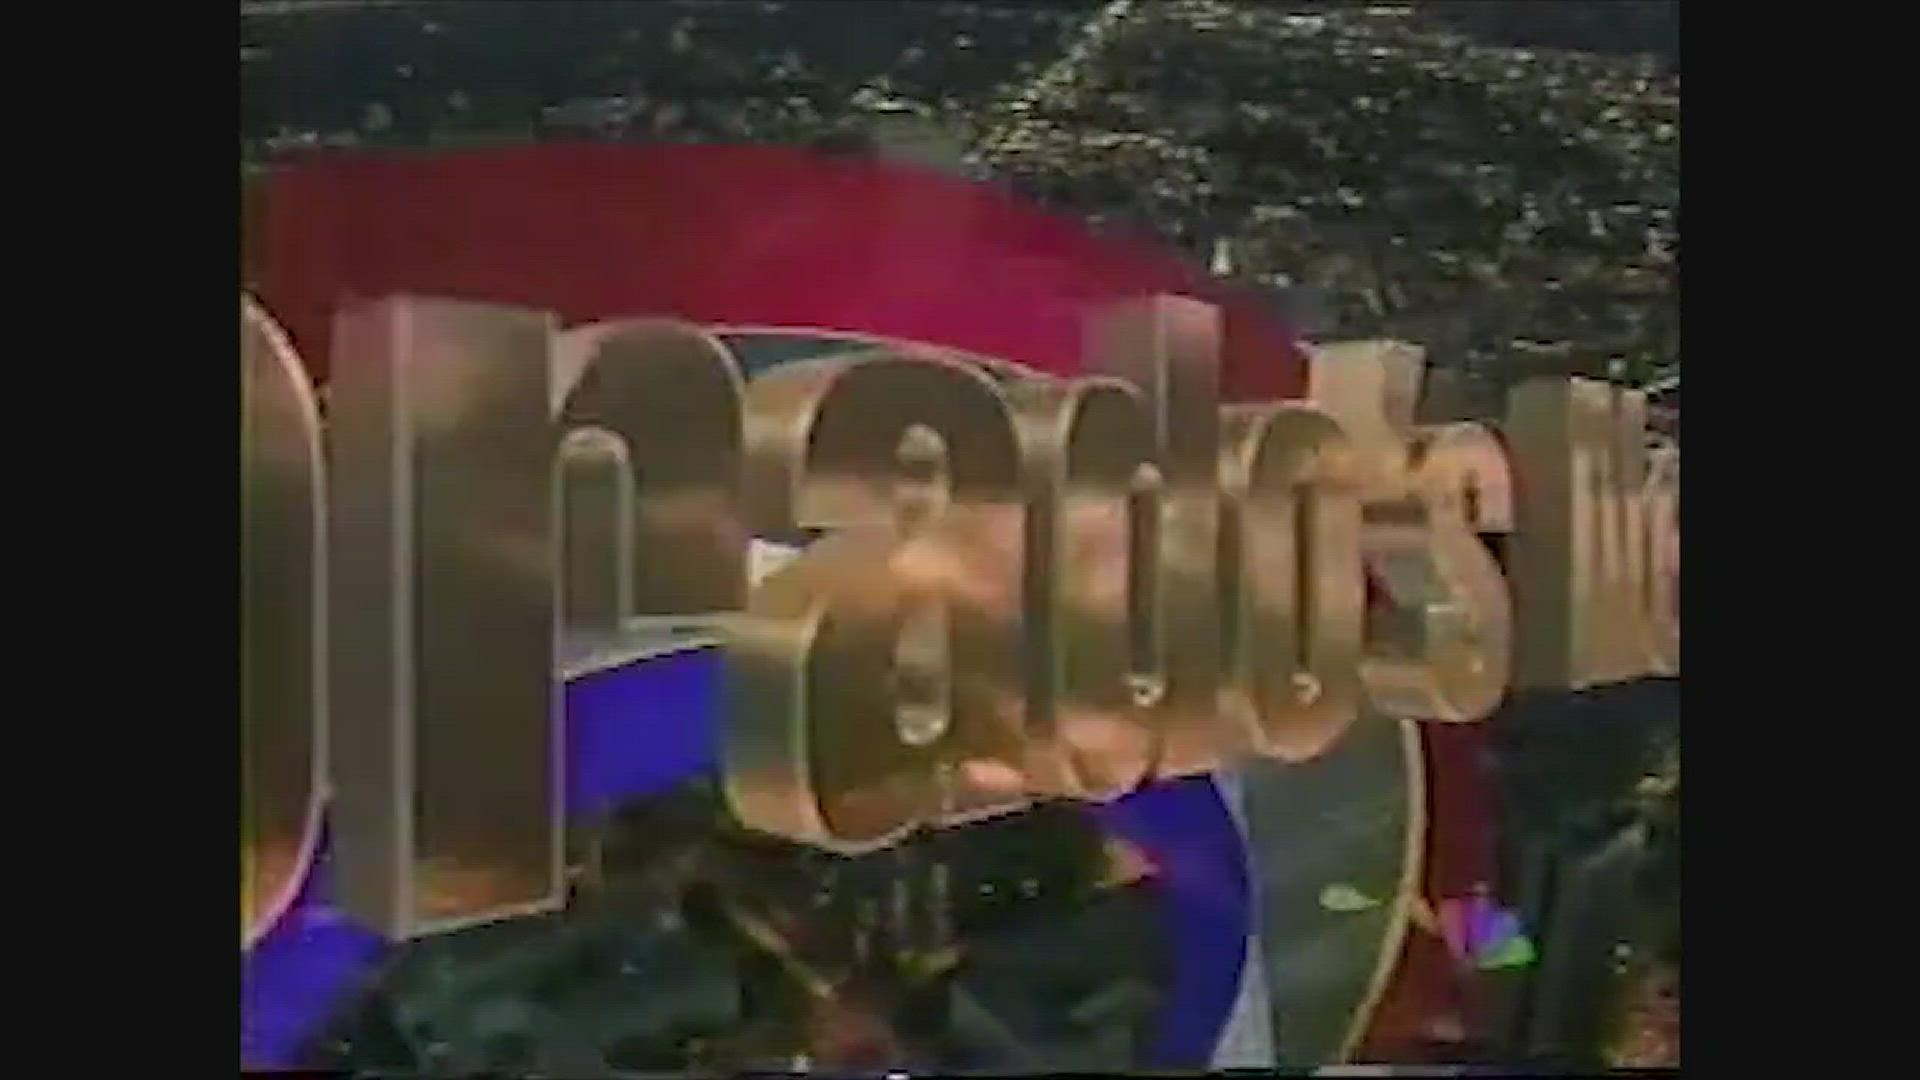 This is one of several videos we dug up of 9NEWS over the years.